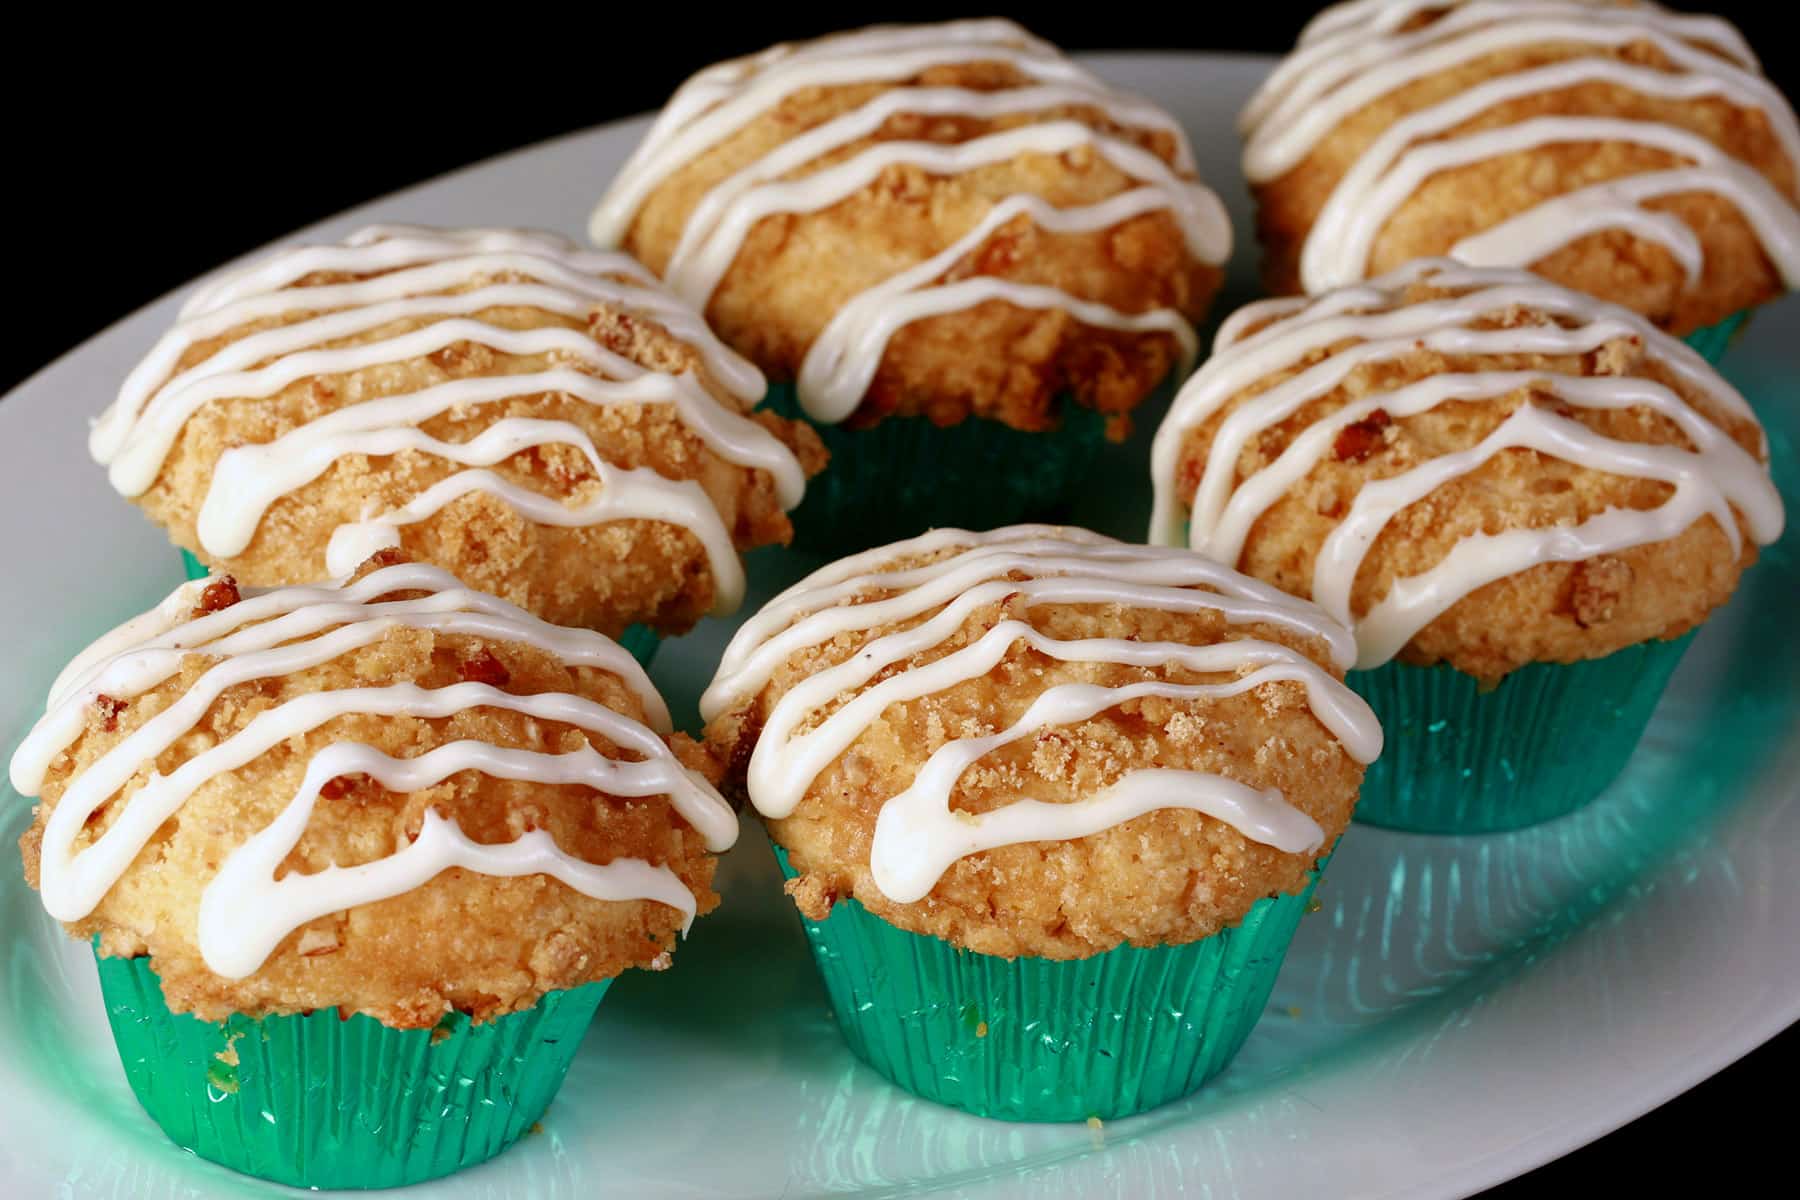 A plate of eggnog muffins, with pecan streusel and drizzled glaze.